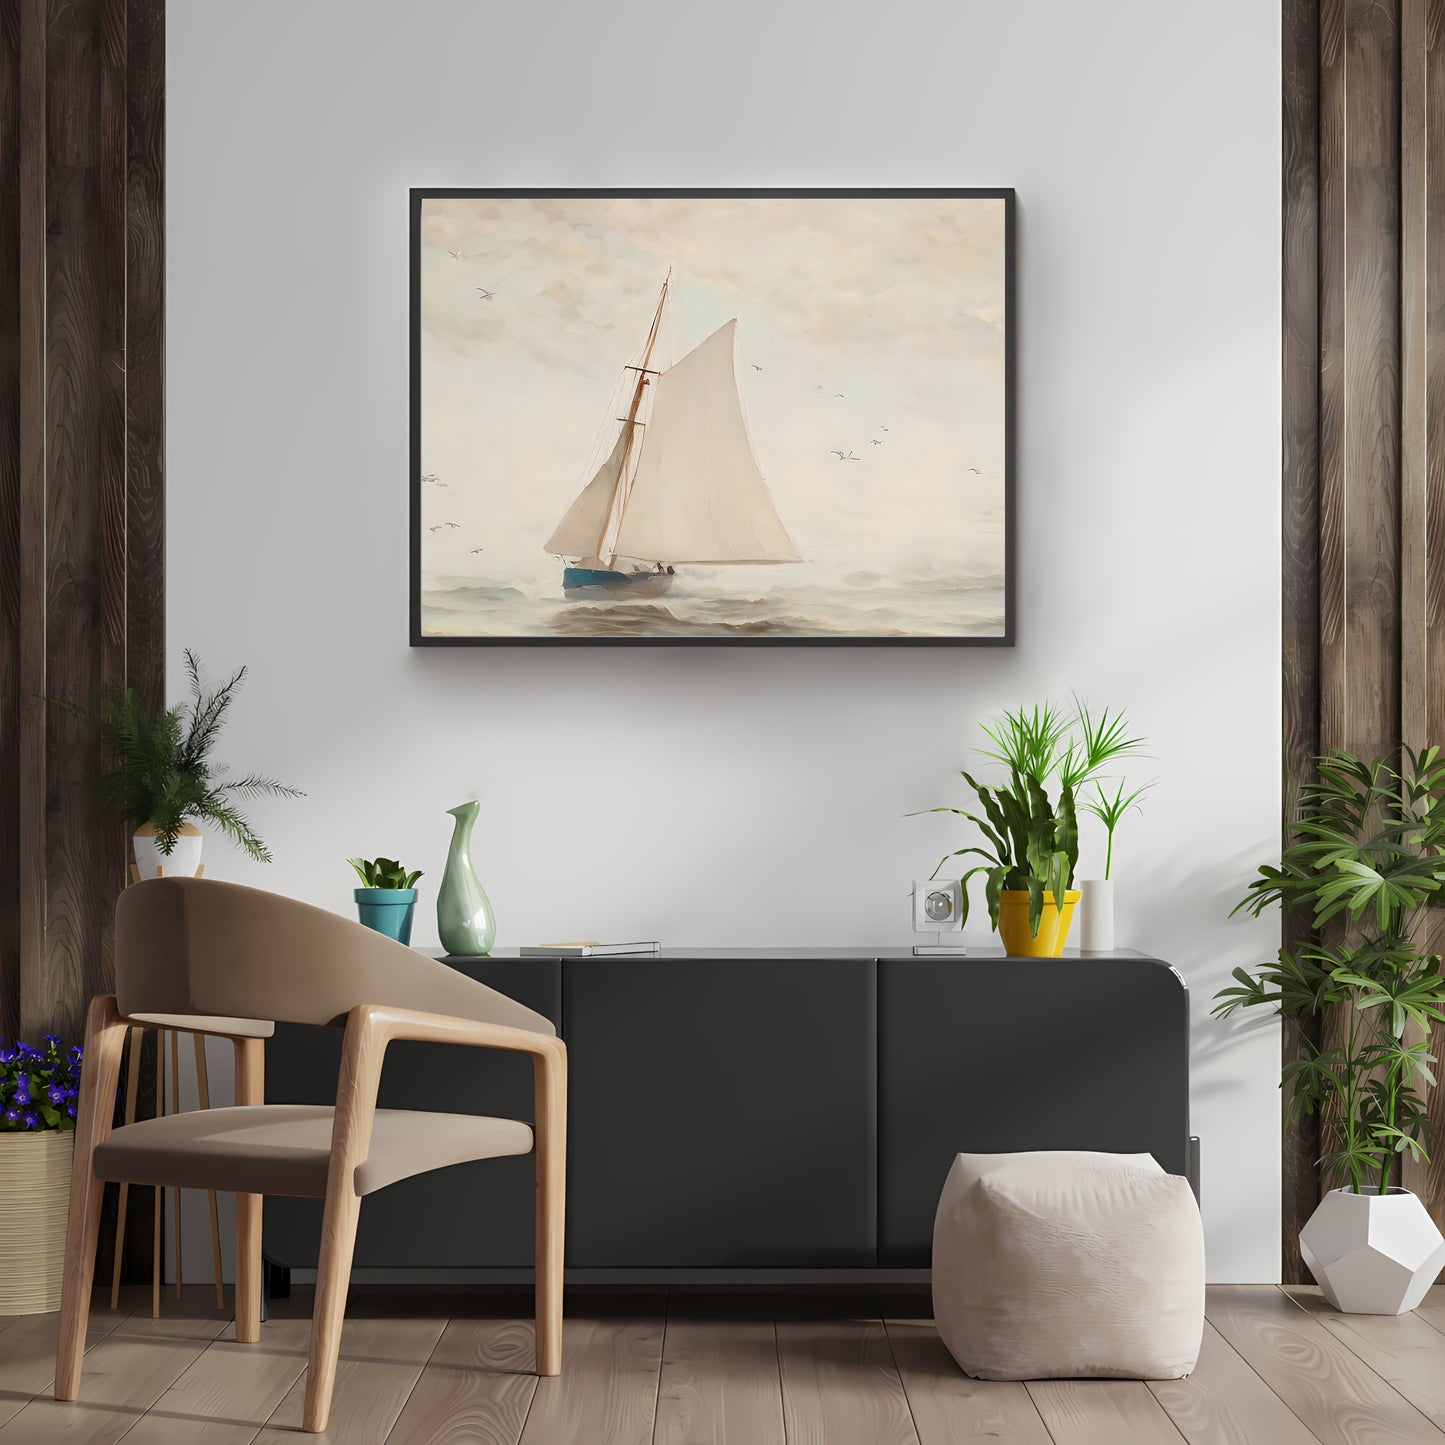 Vintage Sailboat Watercolor Art Paper Poster Prints Mediterranean Coastal Painting Timeless Decor Nautical Wall Art Fresh and Airy Seascape Print